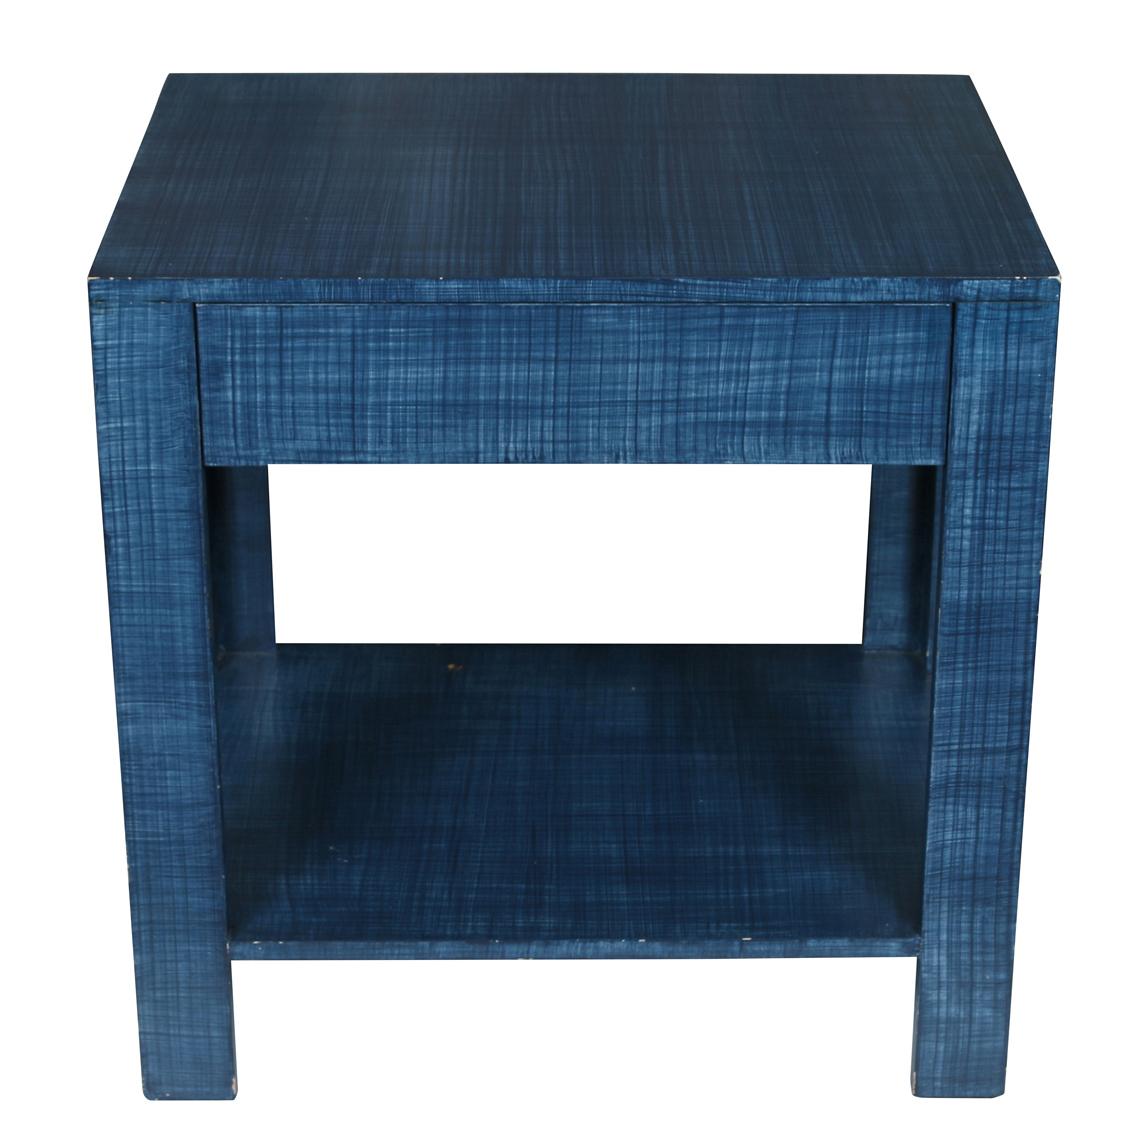 A pair of custom blue strie painted tables with drawer and shelf. Perfect as bedside tables or side tables.